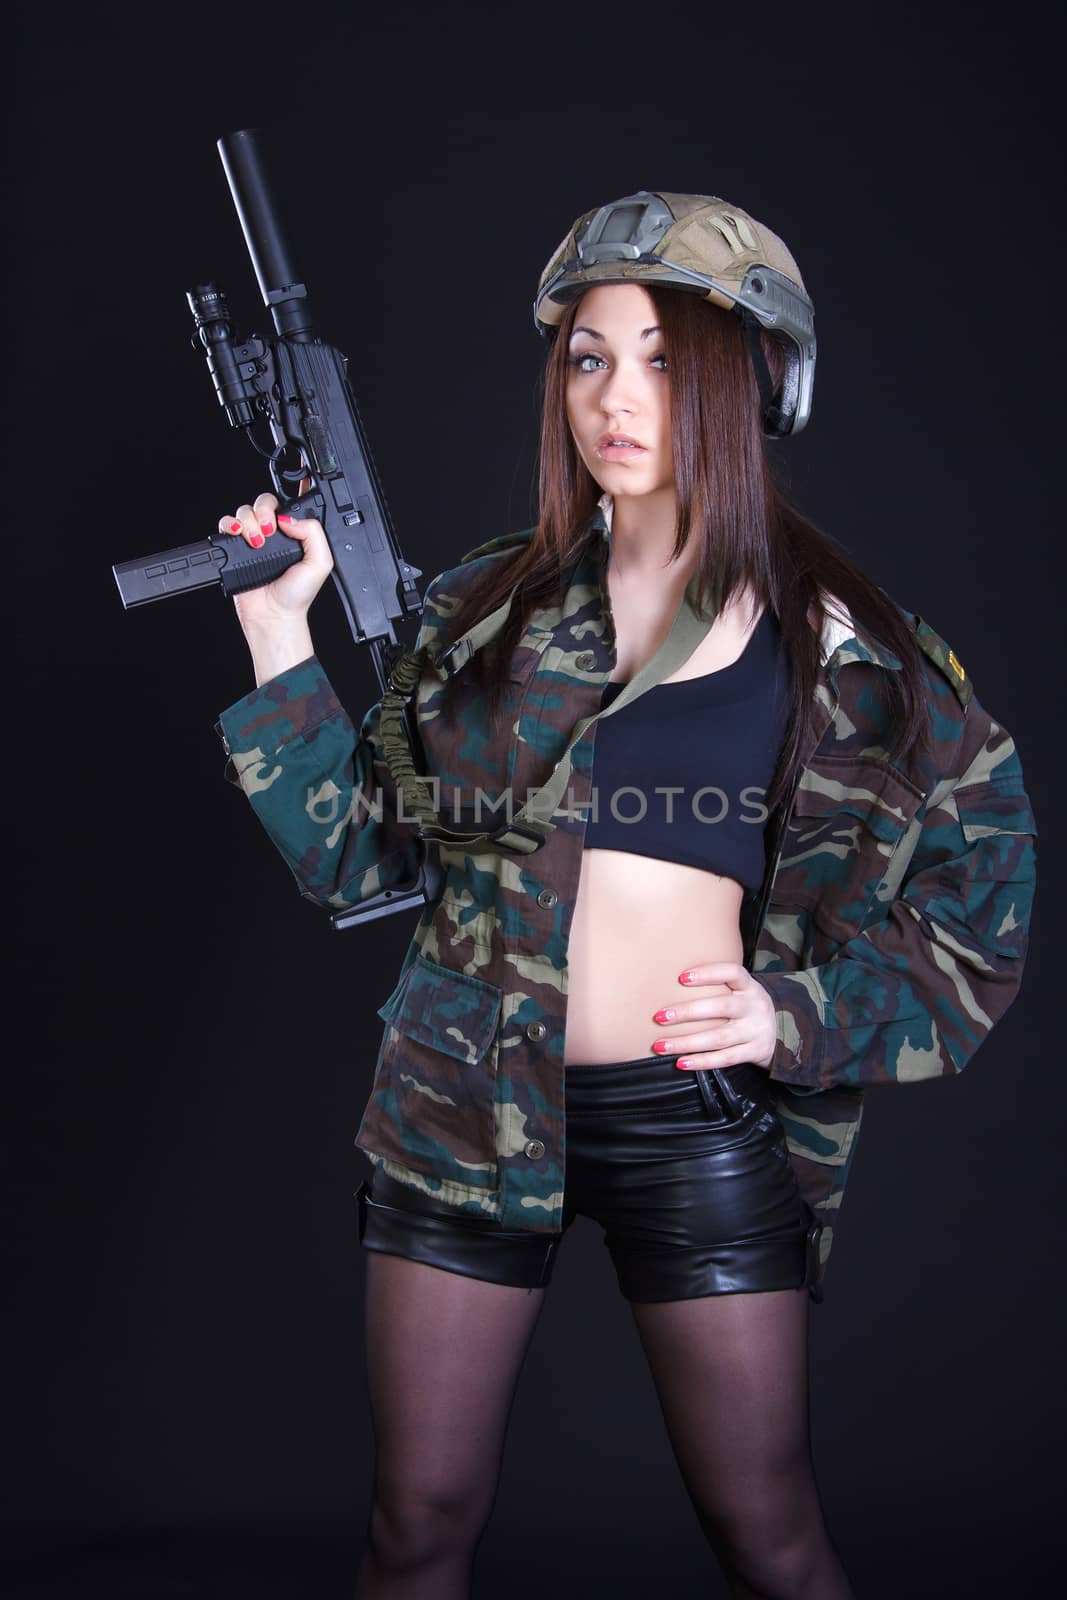 Portrait of a woman in a military uniform with a submachine gun by Artzzz